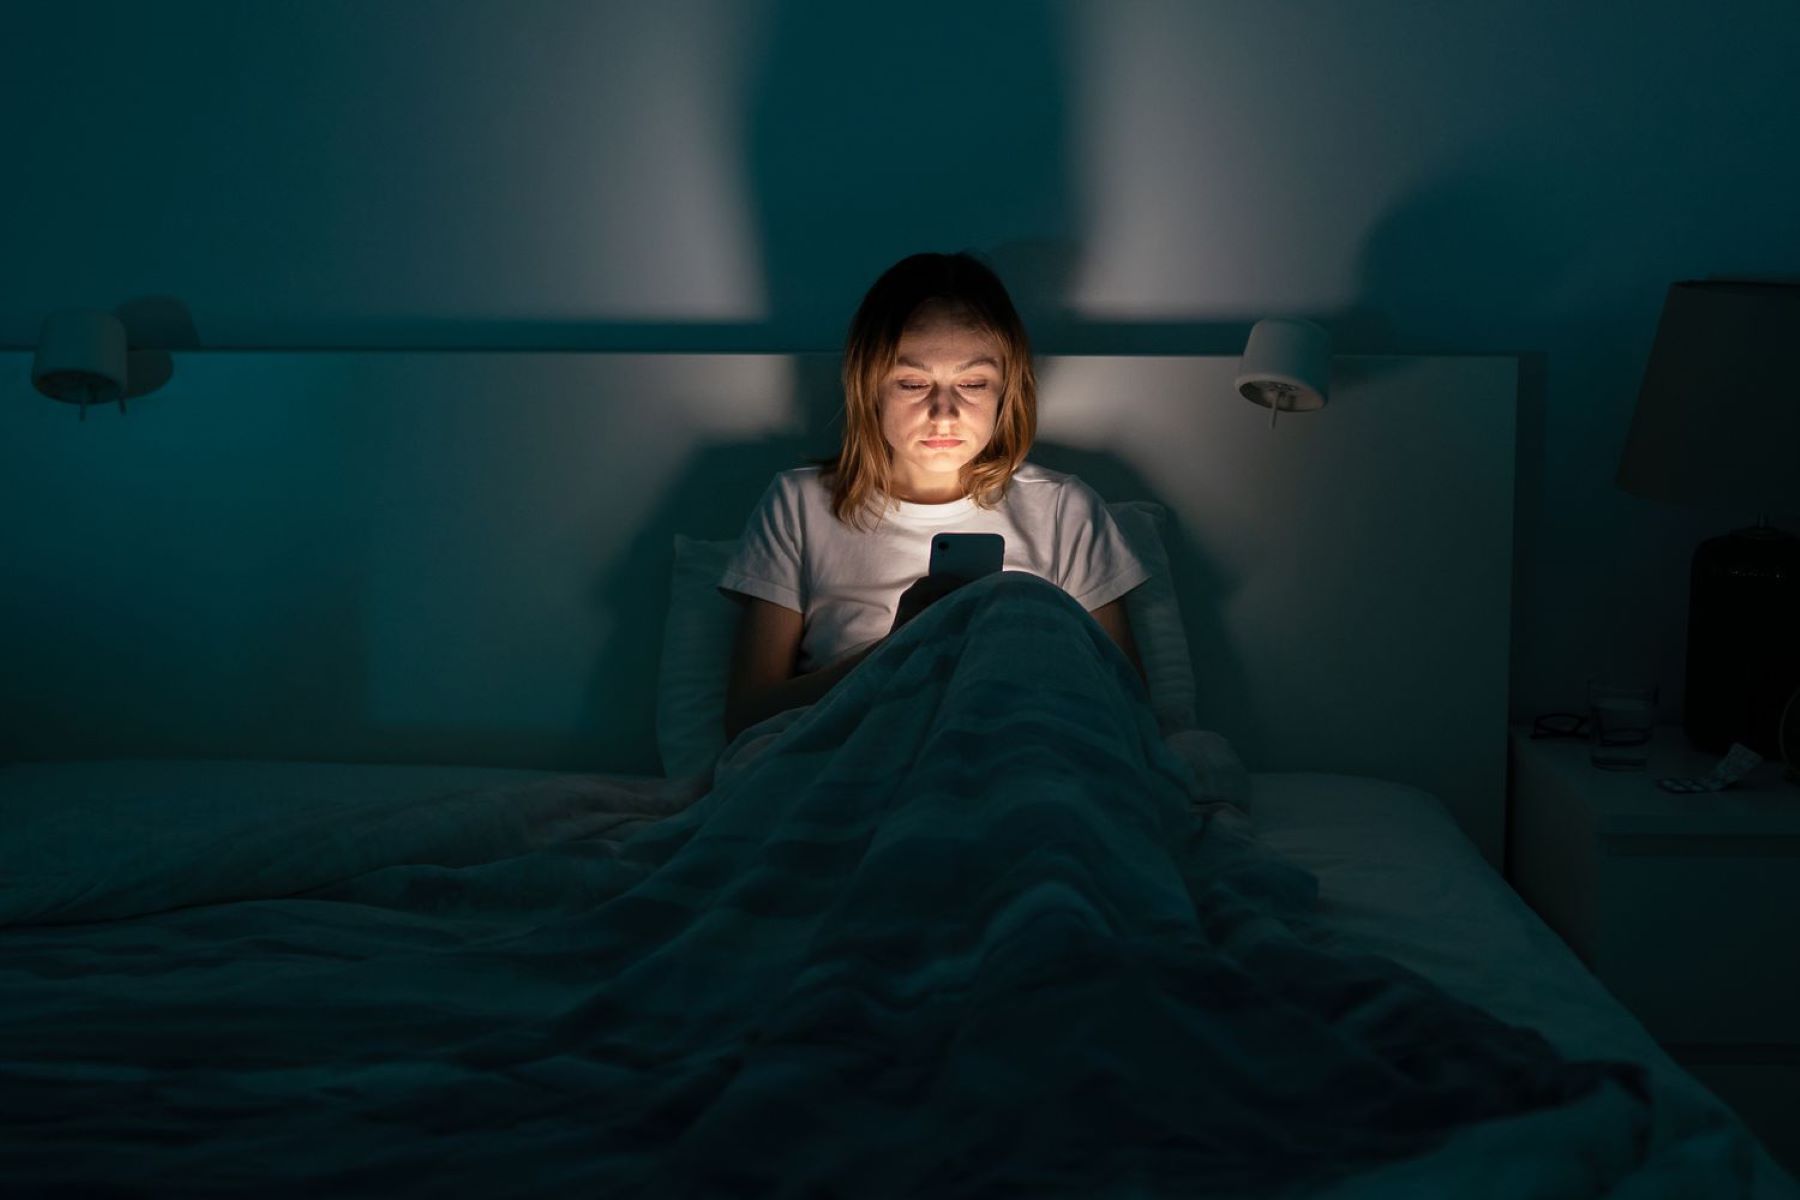 The Surprising Reason People Ask About Your Sleep Instead Of Your Night